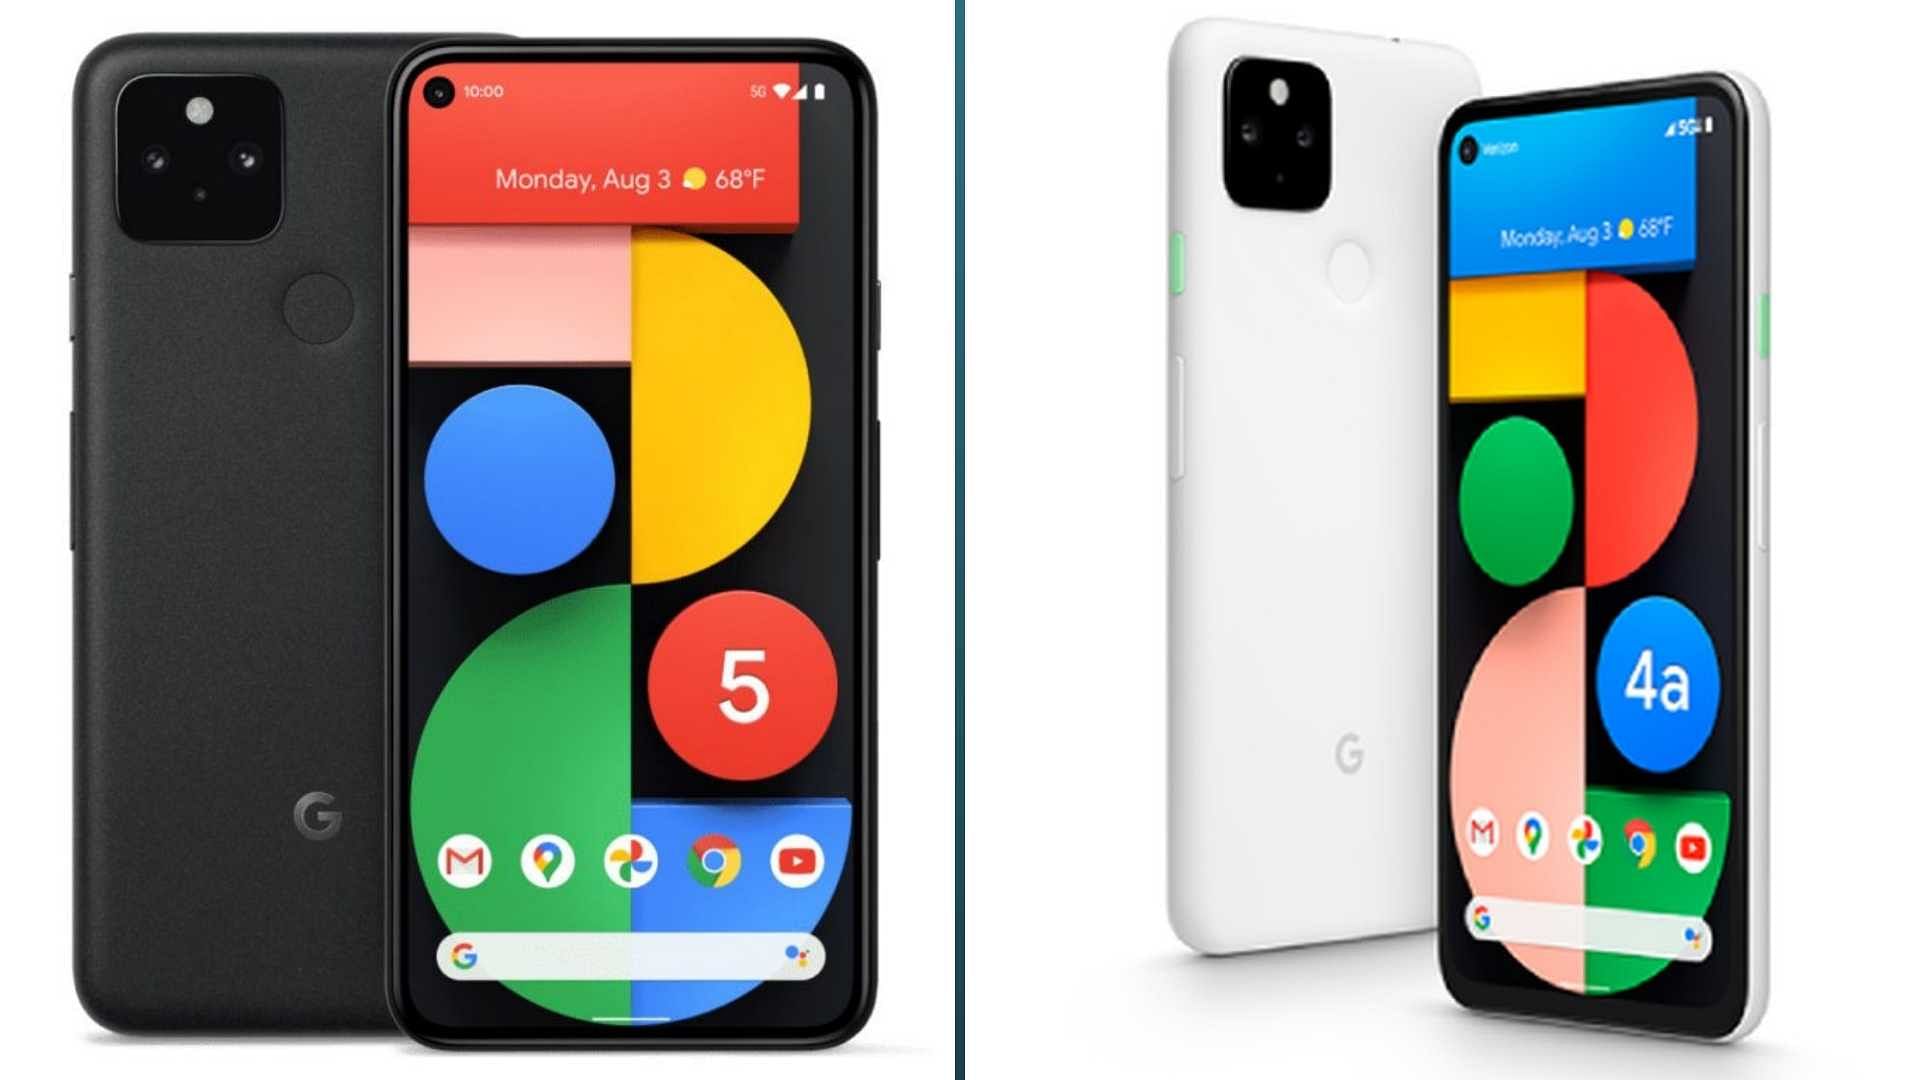 Google Camera 8.1 Version: Google Pixel 5 (left) camera features will now be compatible will older Pixel device variants.&nbsp;